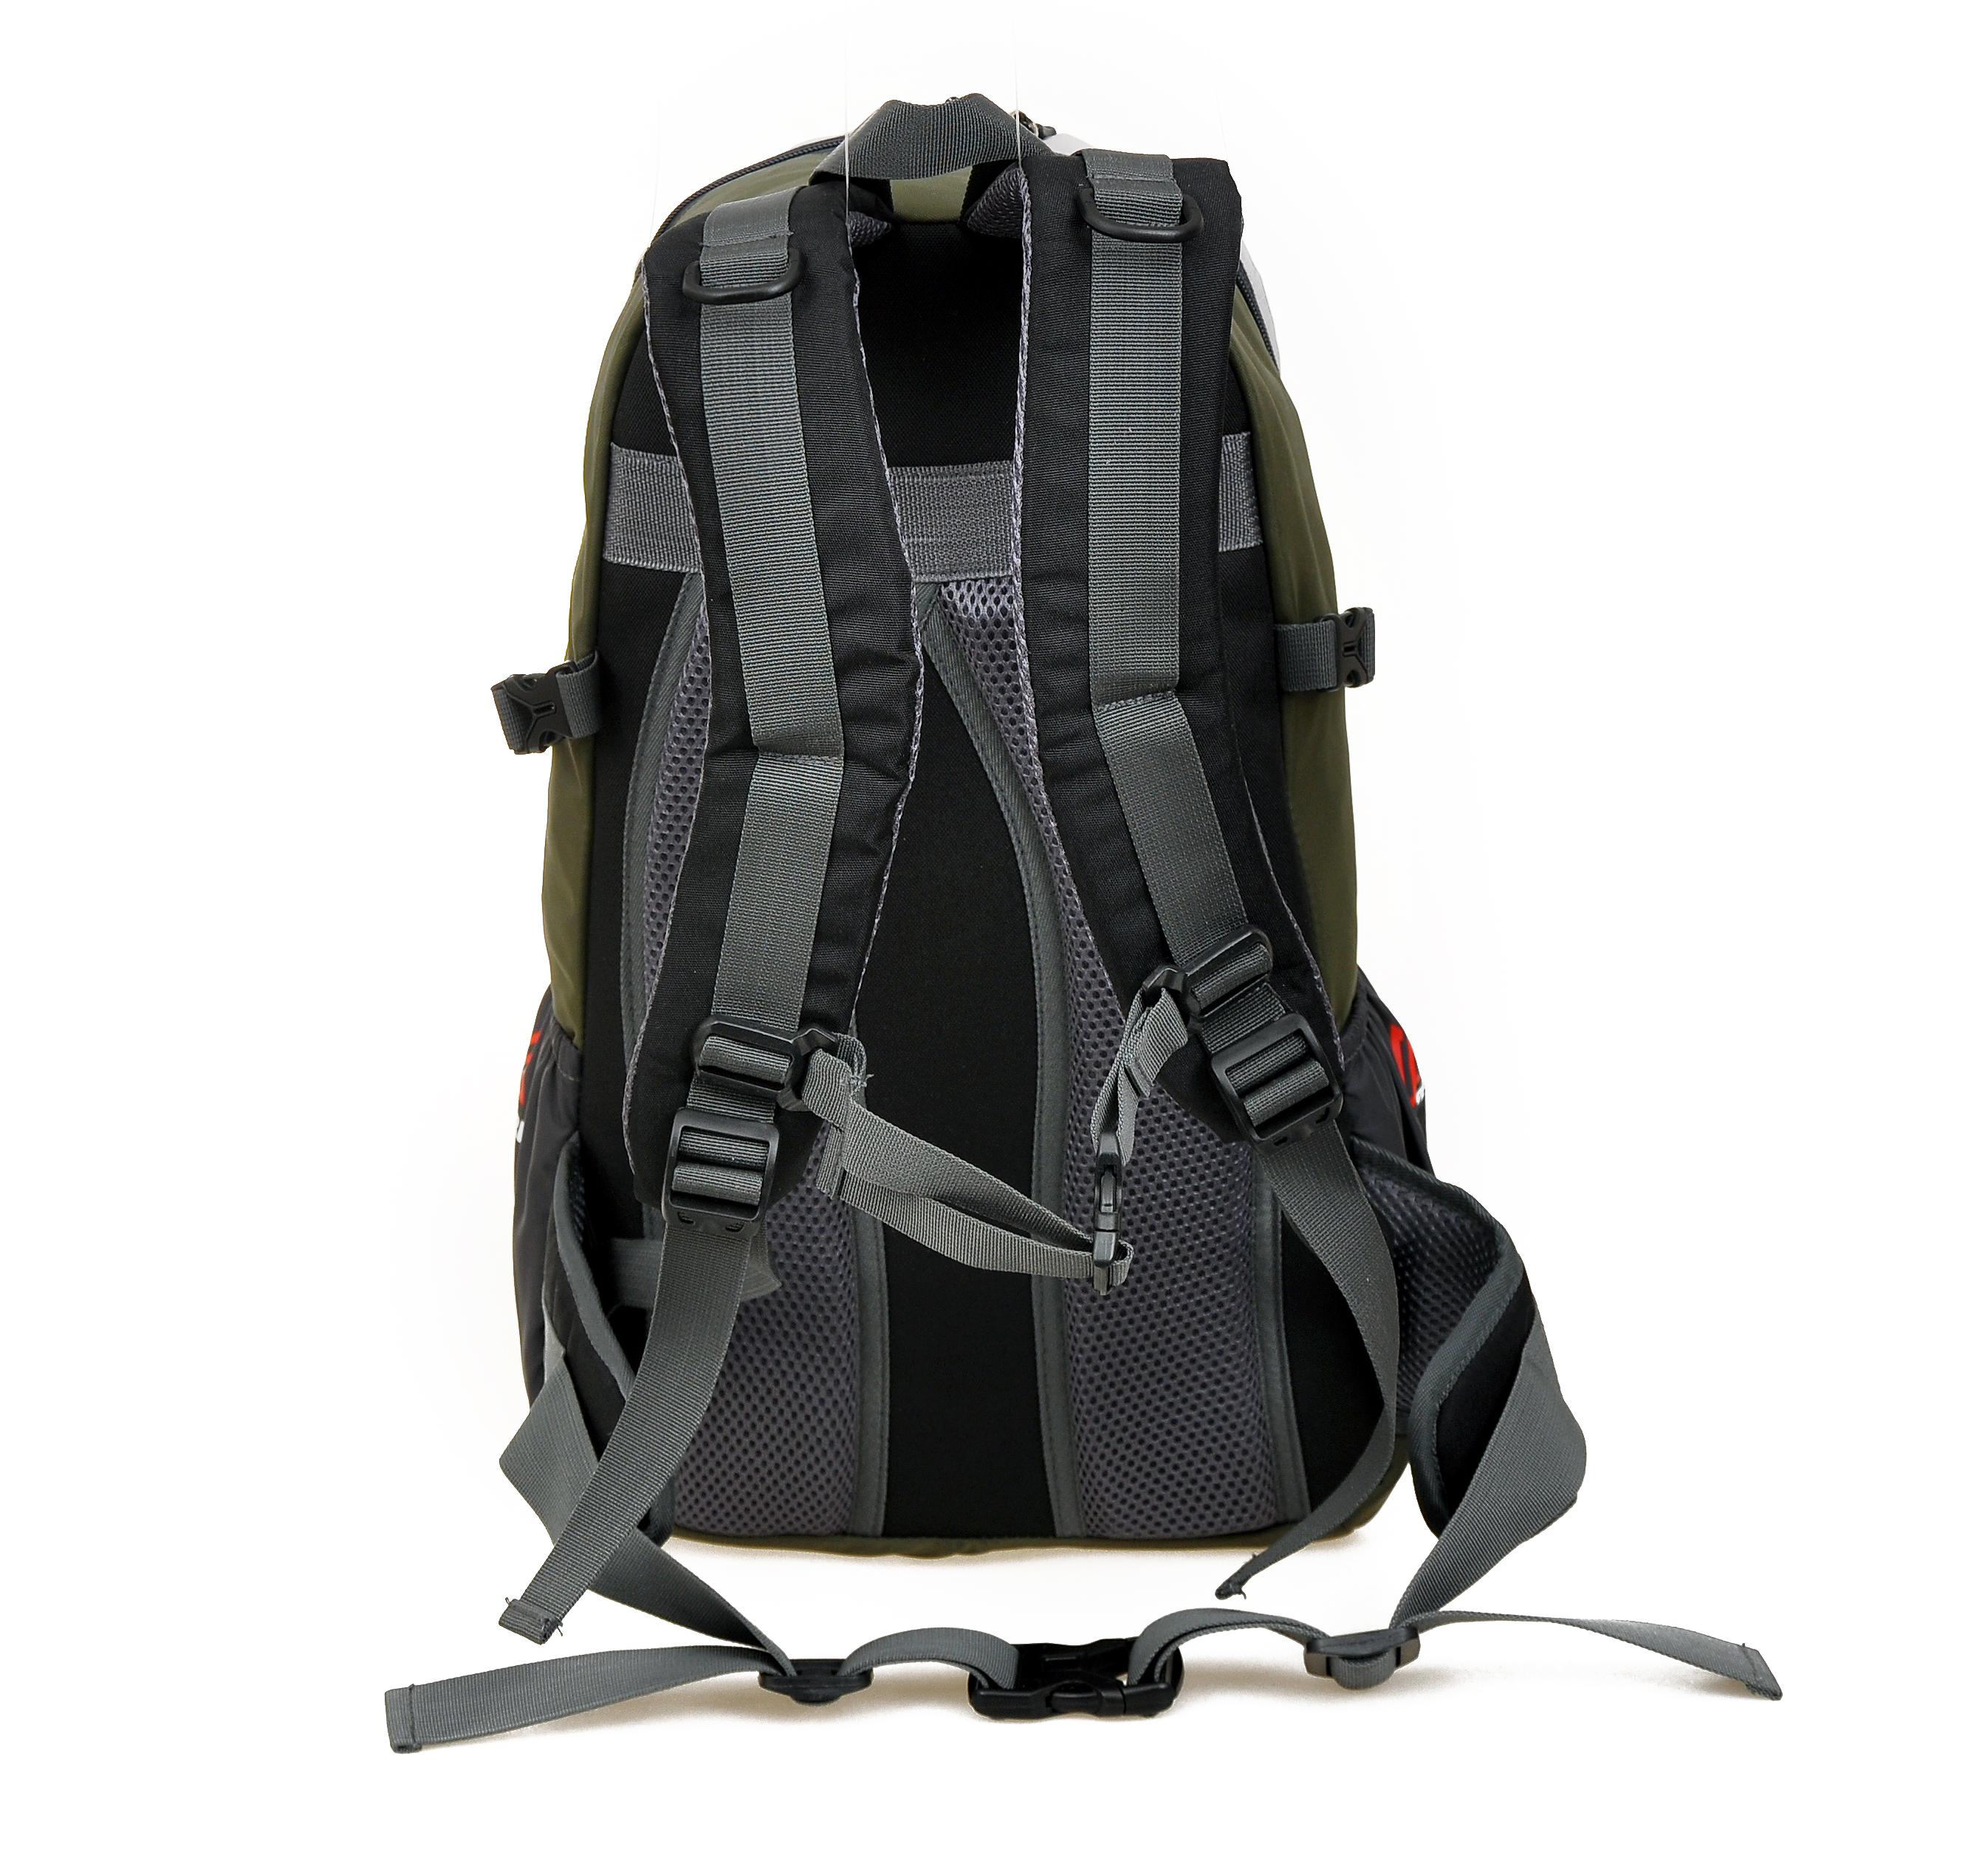  Foldable Packable Backpack